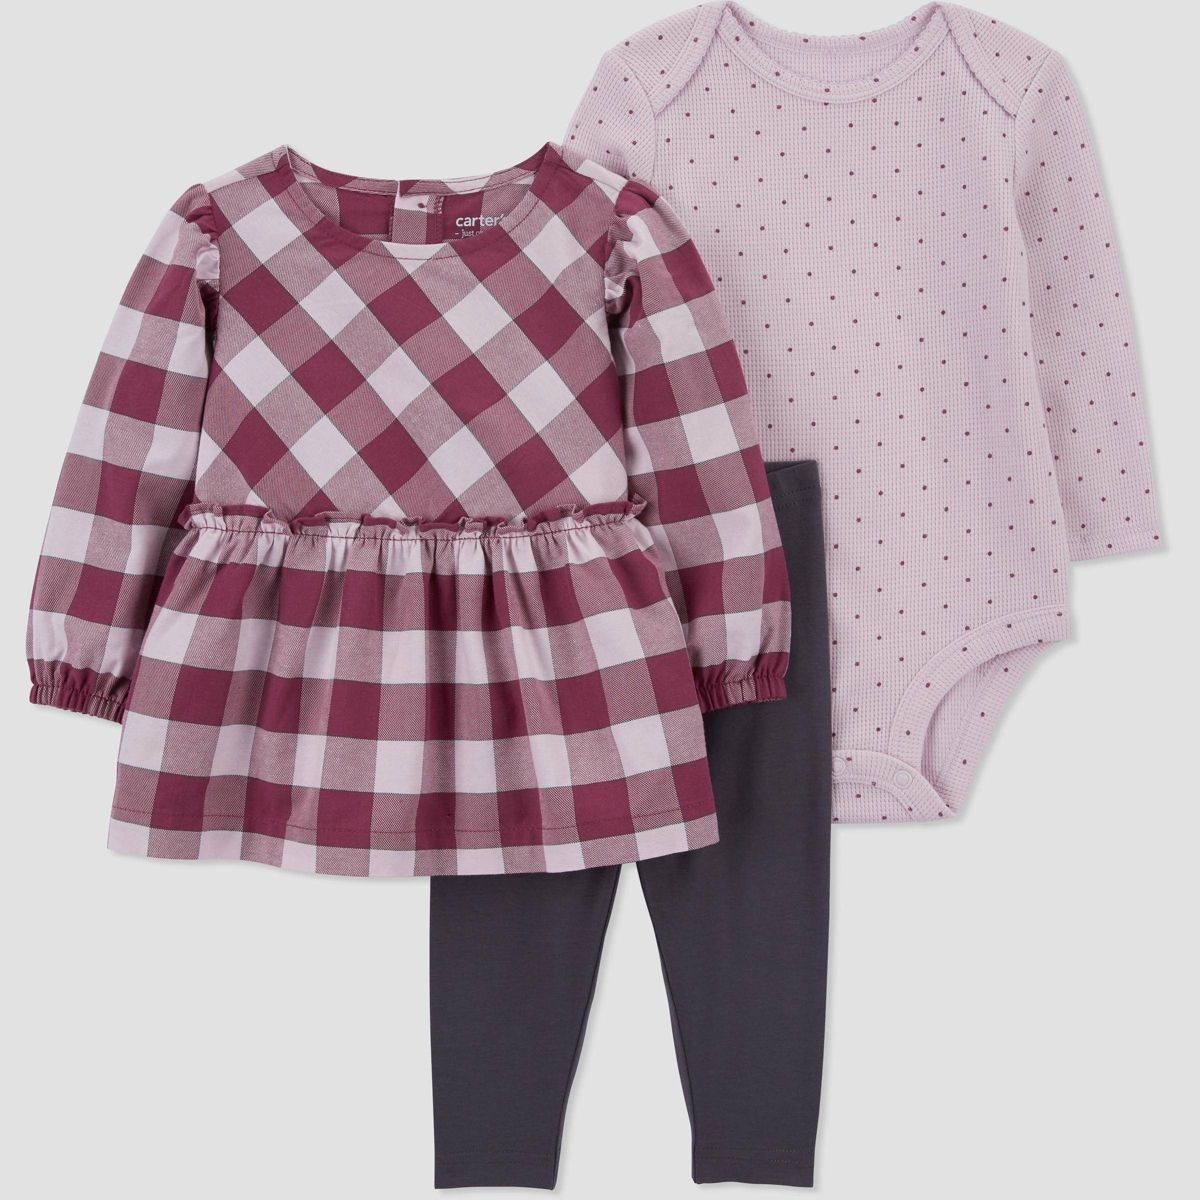 Carter's Just One You® Baby Girls' Gingham Top & Bottom Set - Purple | Target